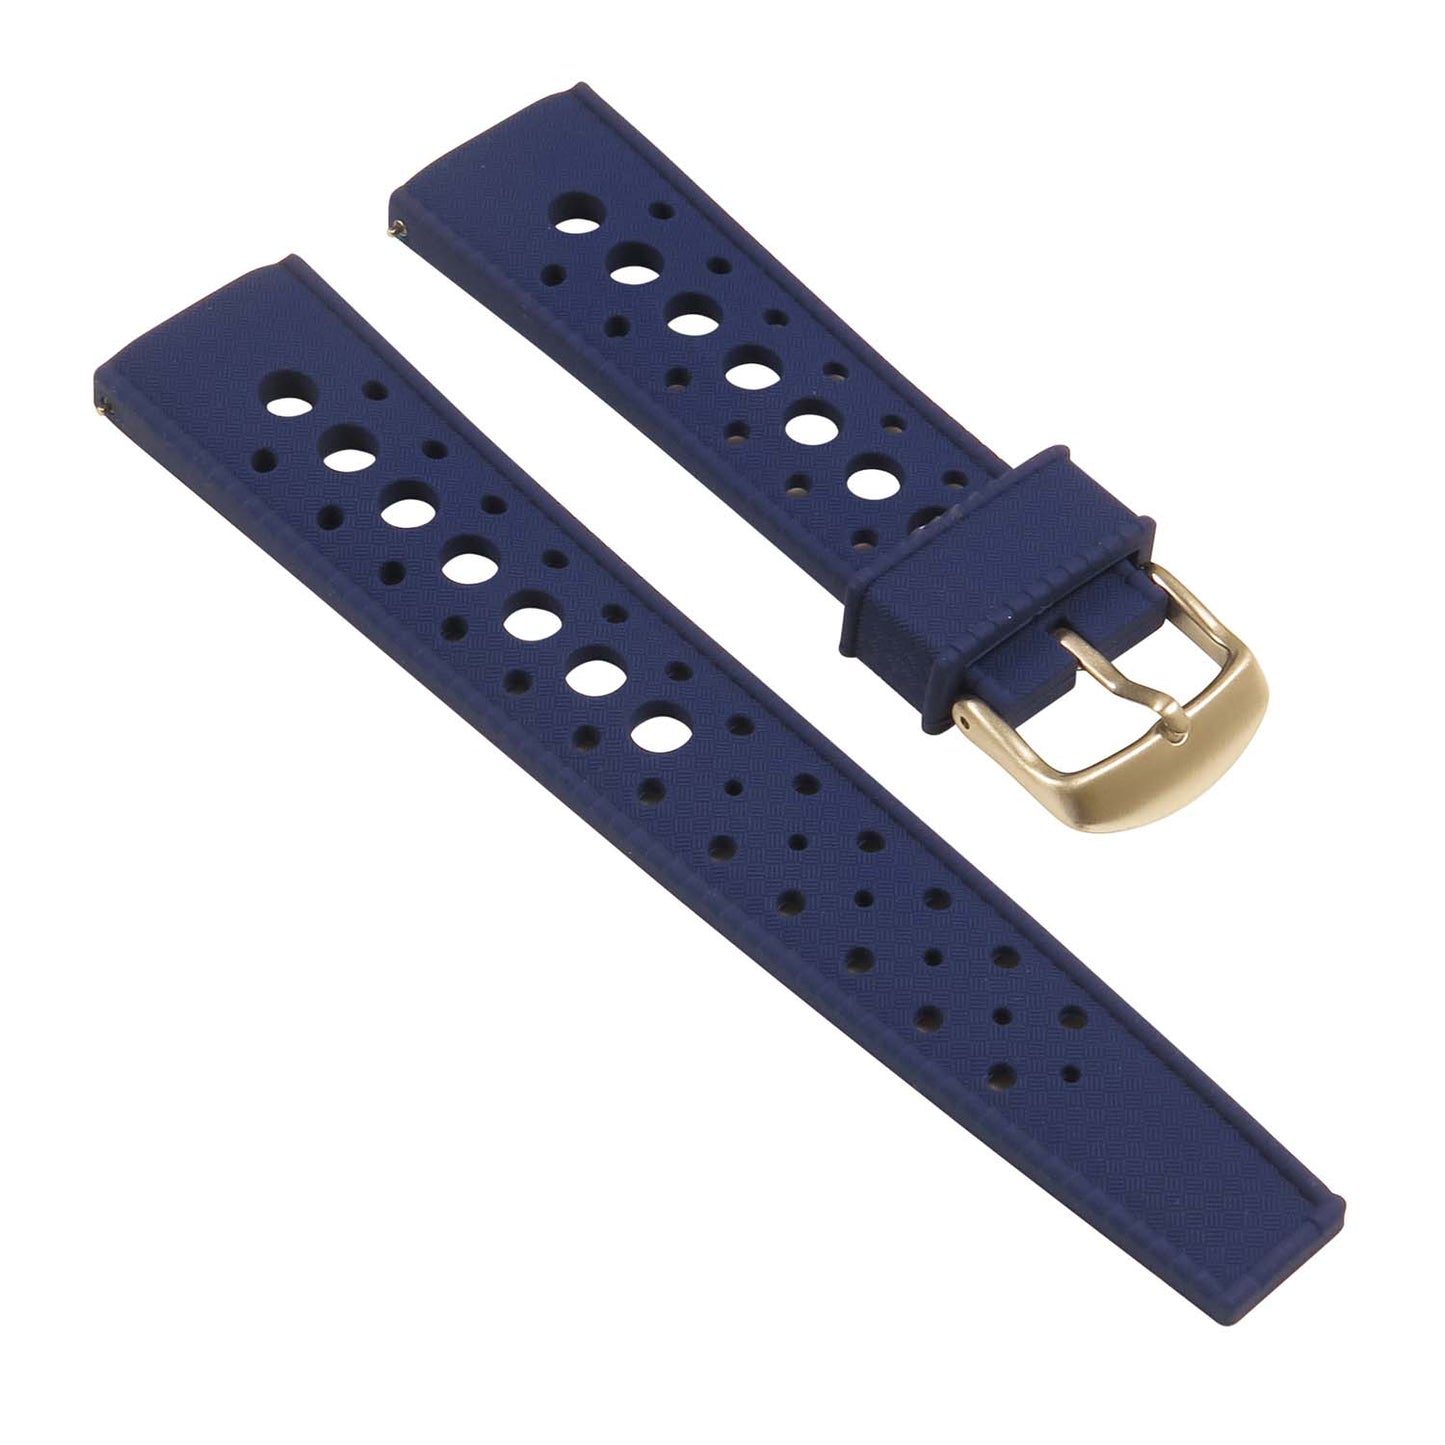 Retro Rubber Rally Strap for Apple Watch